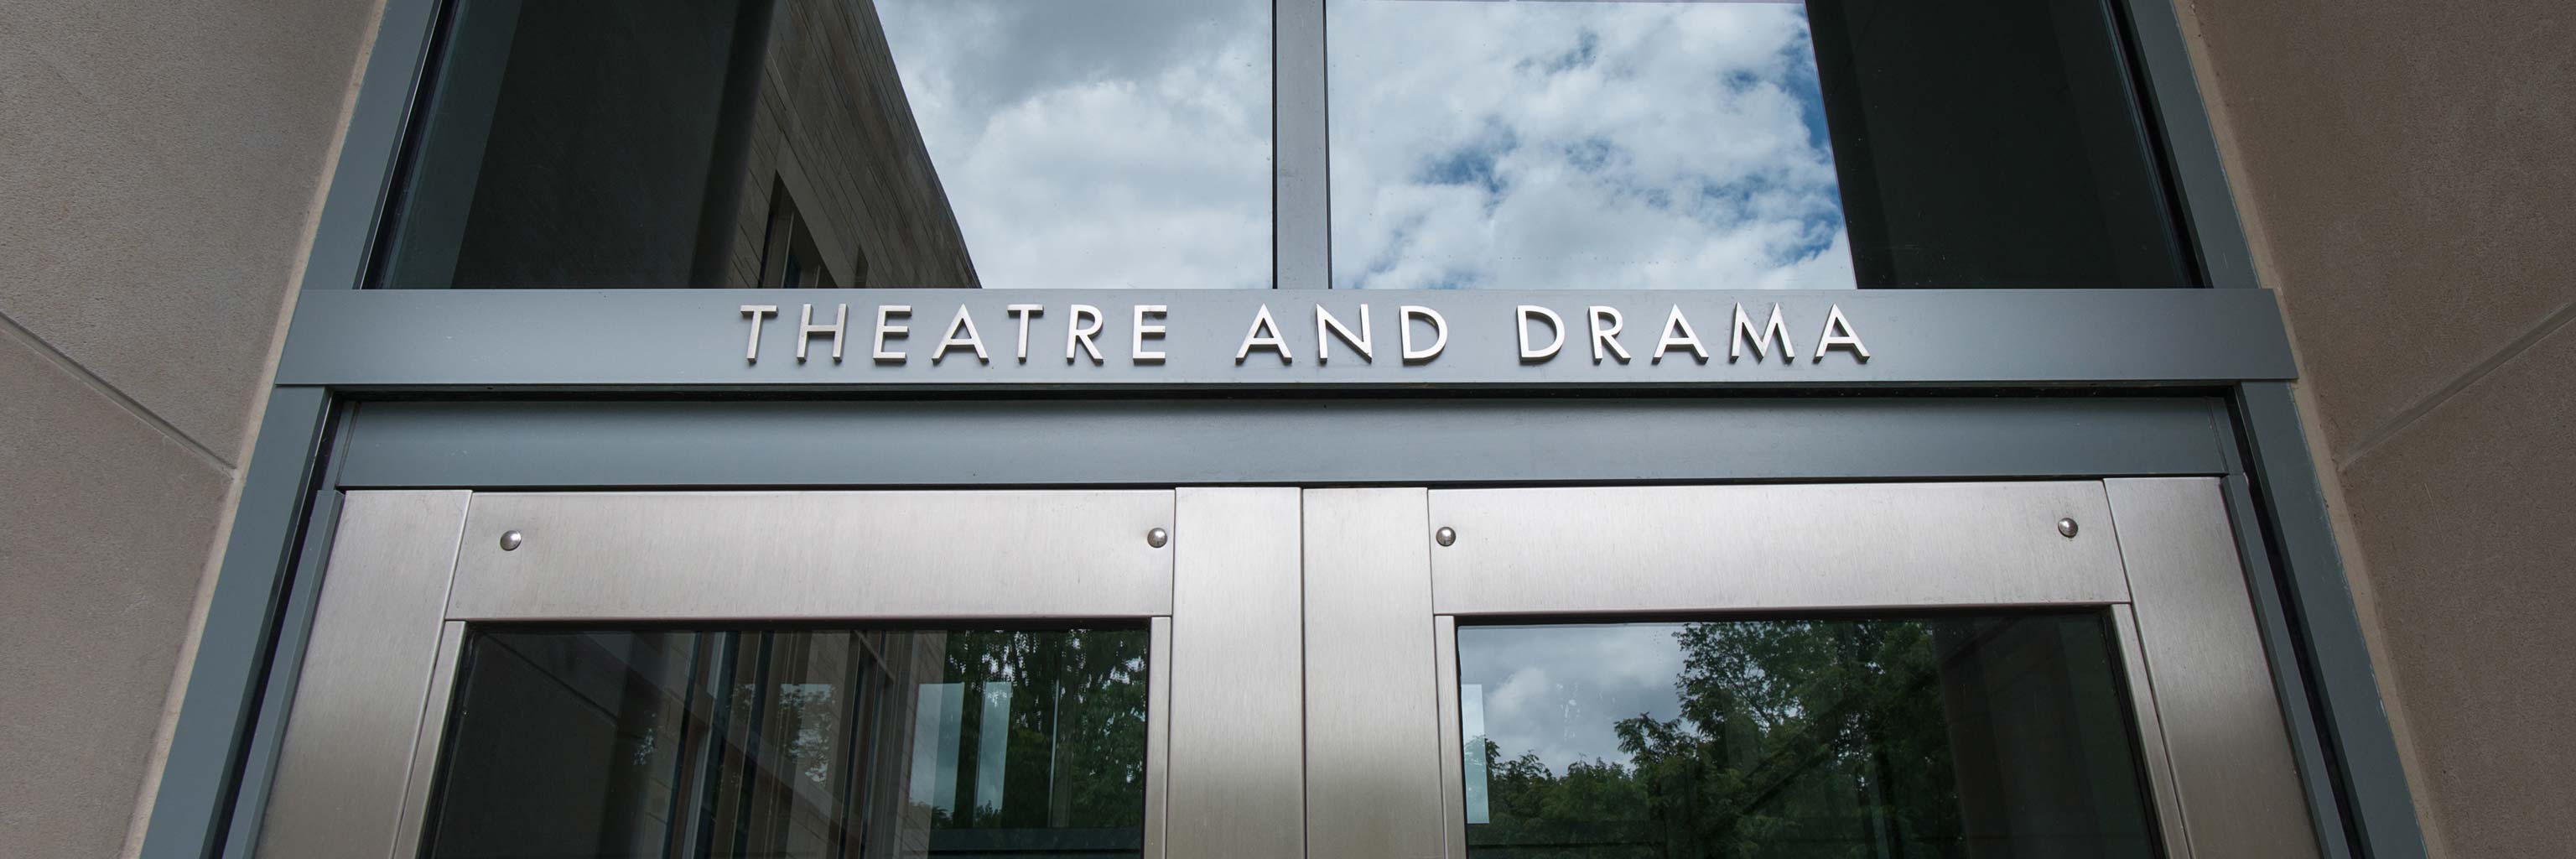 Theatre and Drama front doors